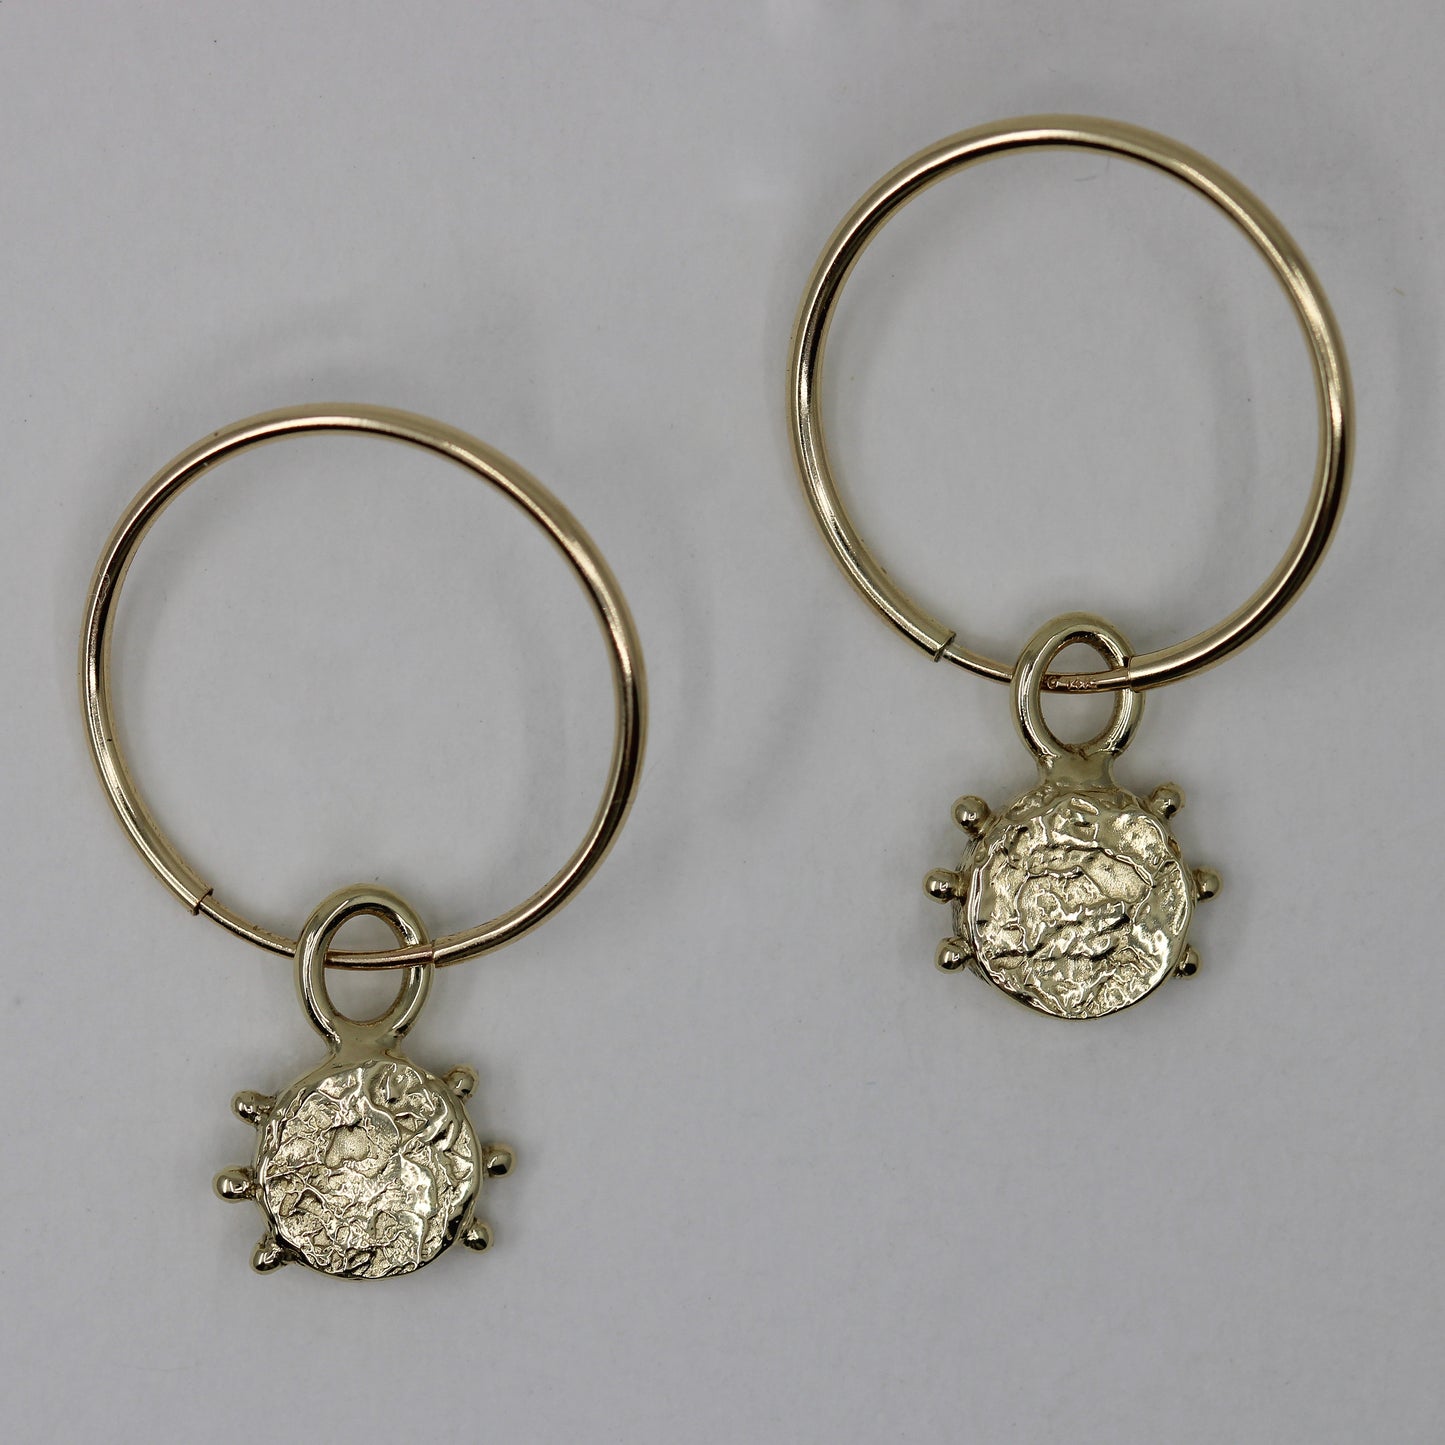 The Ancient Coin Earrings